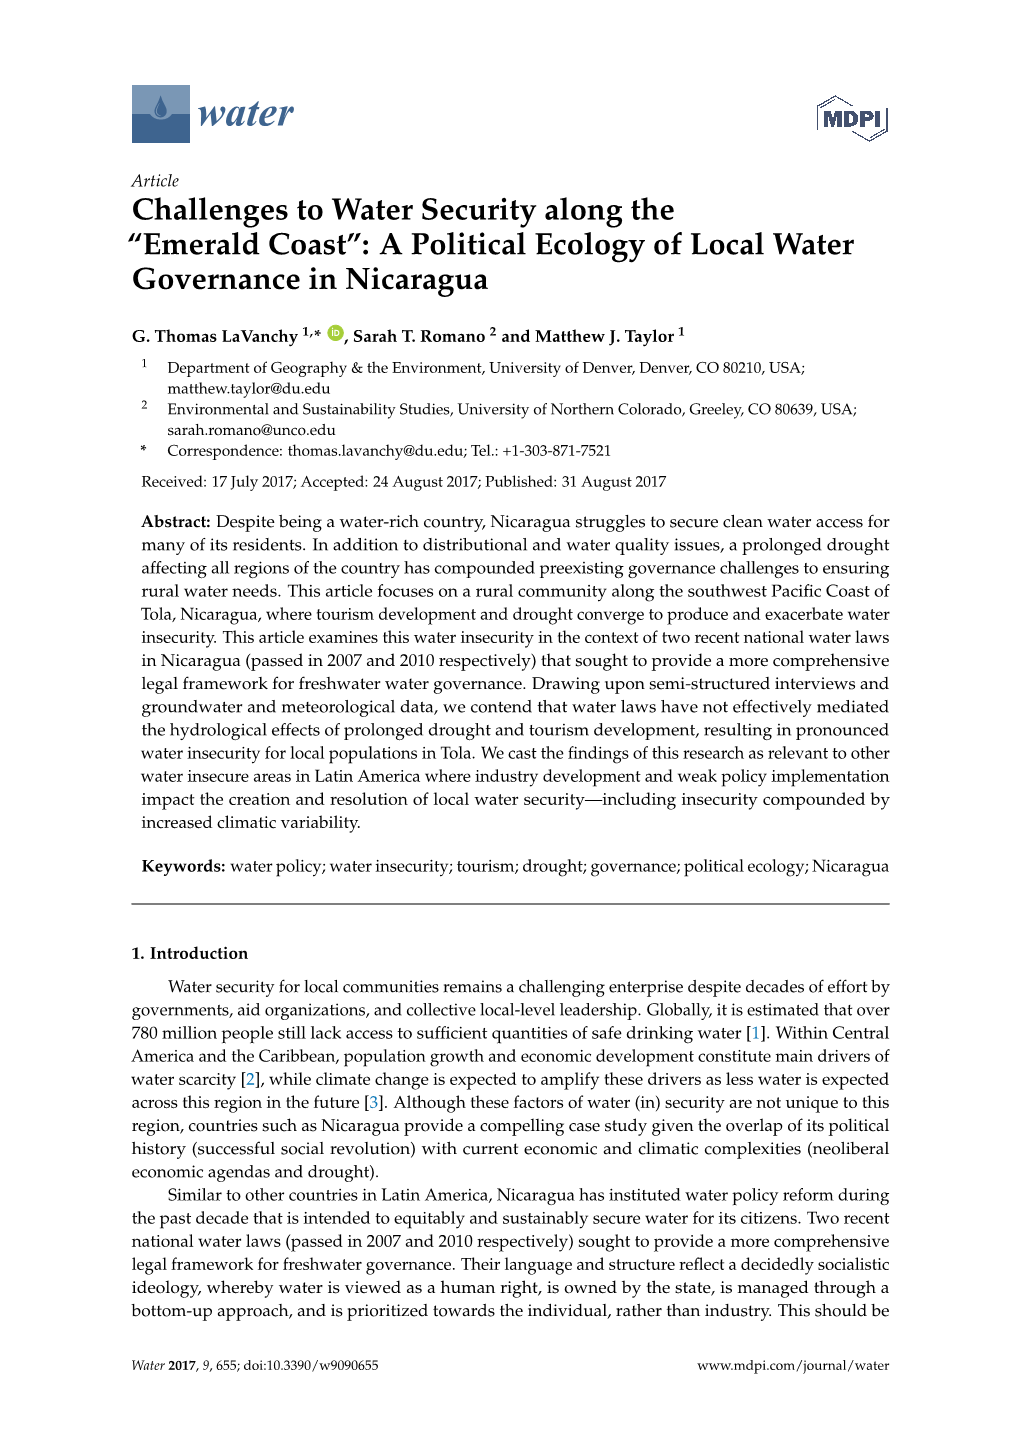 A Political Ecology of Local Water Governance in Nicaragua